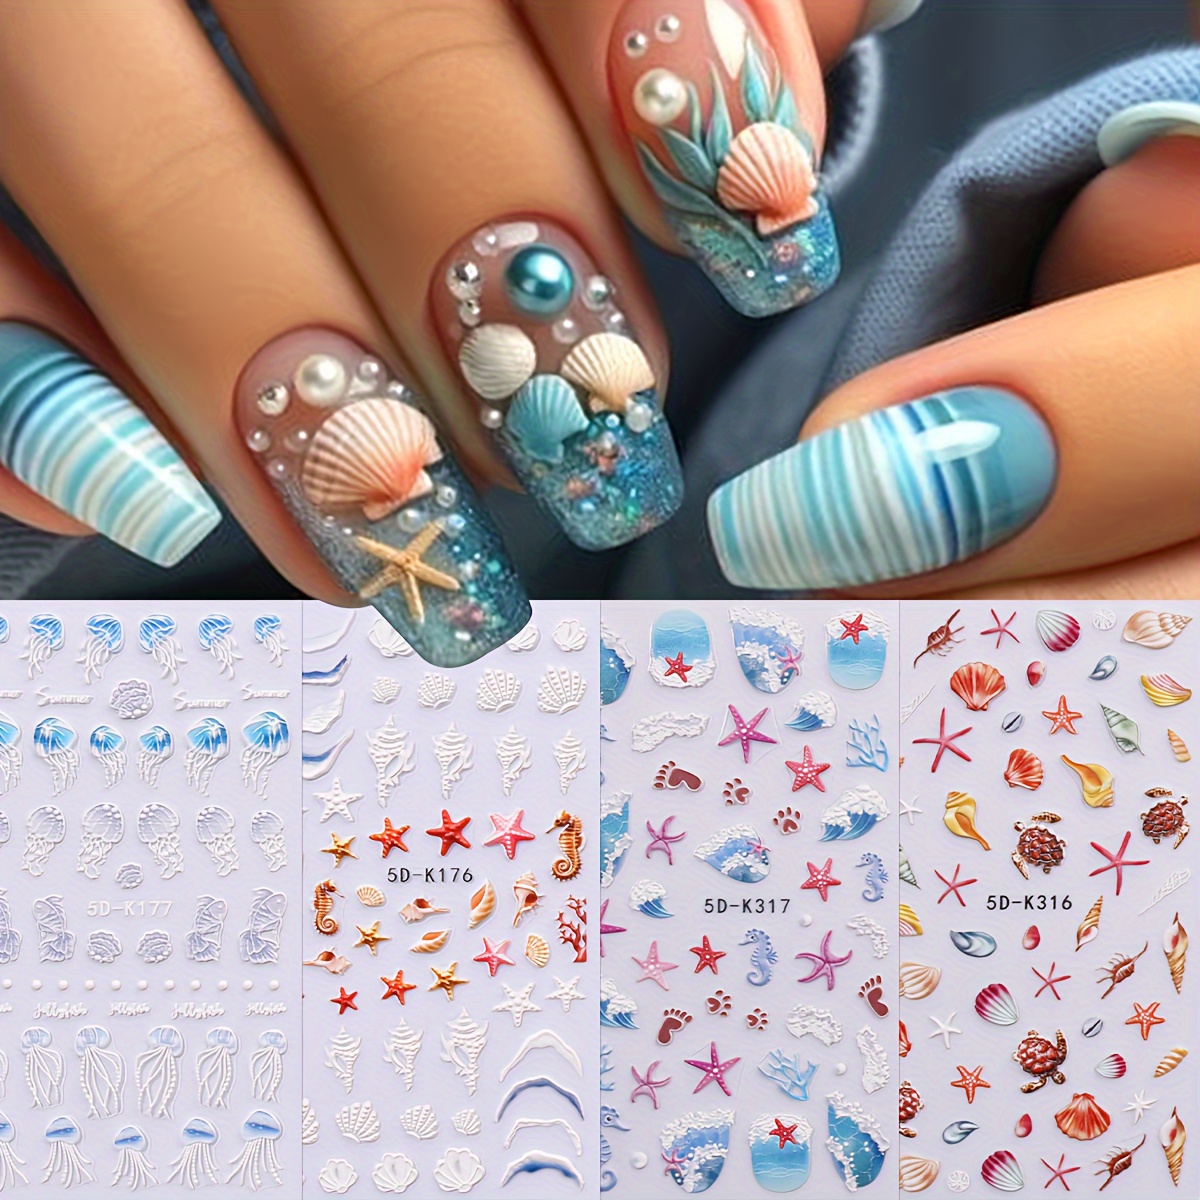 

4-piece Summer Beach & Ocean Life Nail Art Stickers - Self-adhesive, 3d Embossed Marine Creatures Decals For Diy Manicure